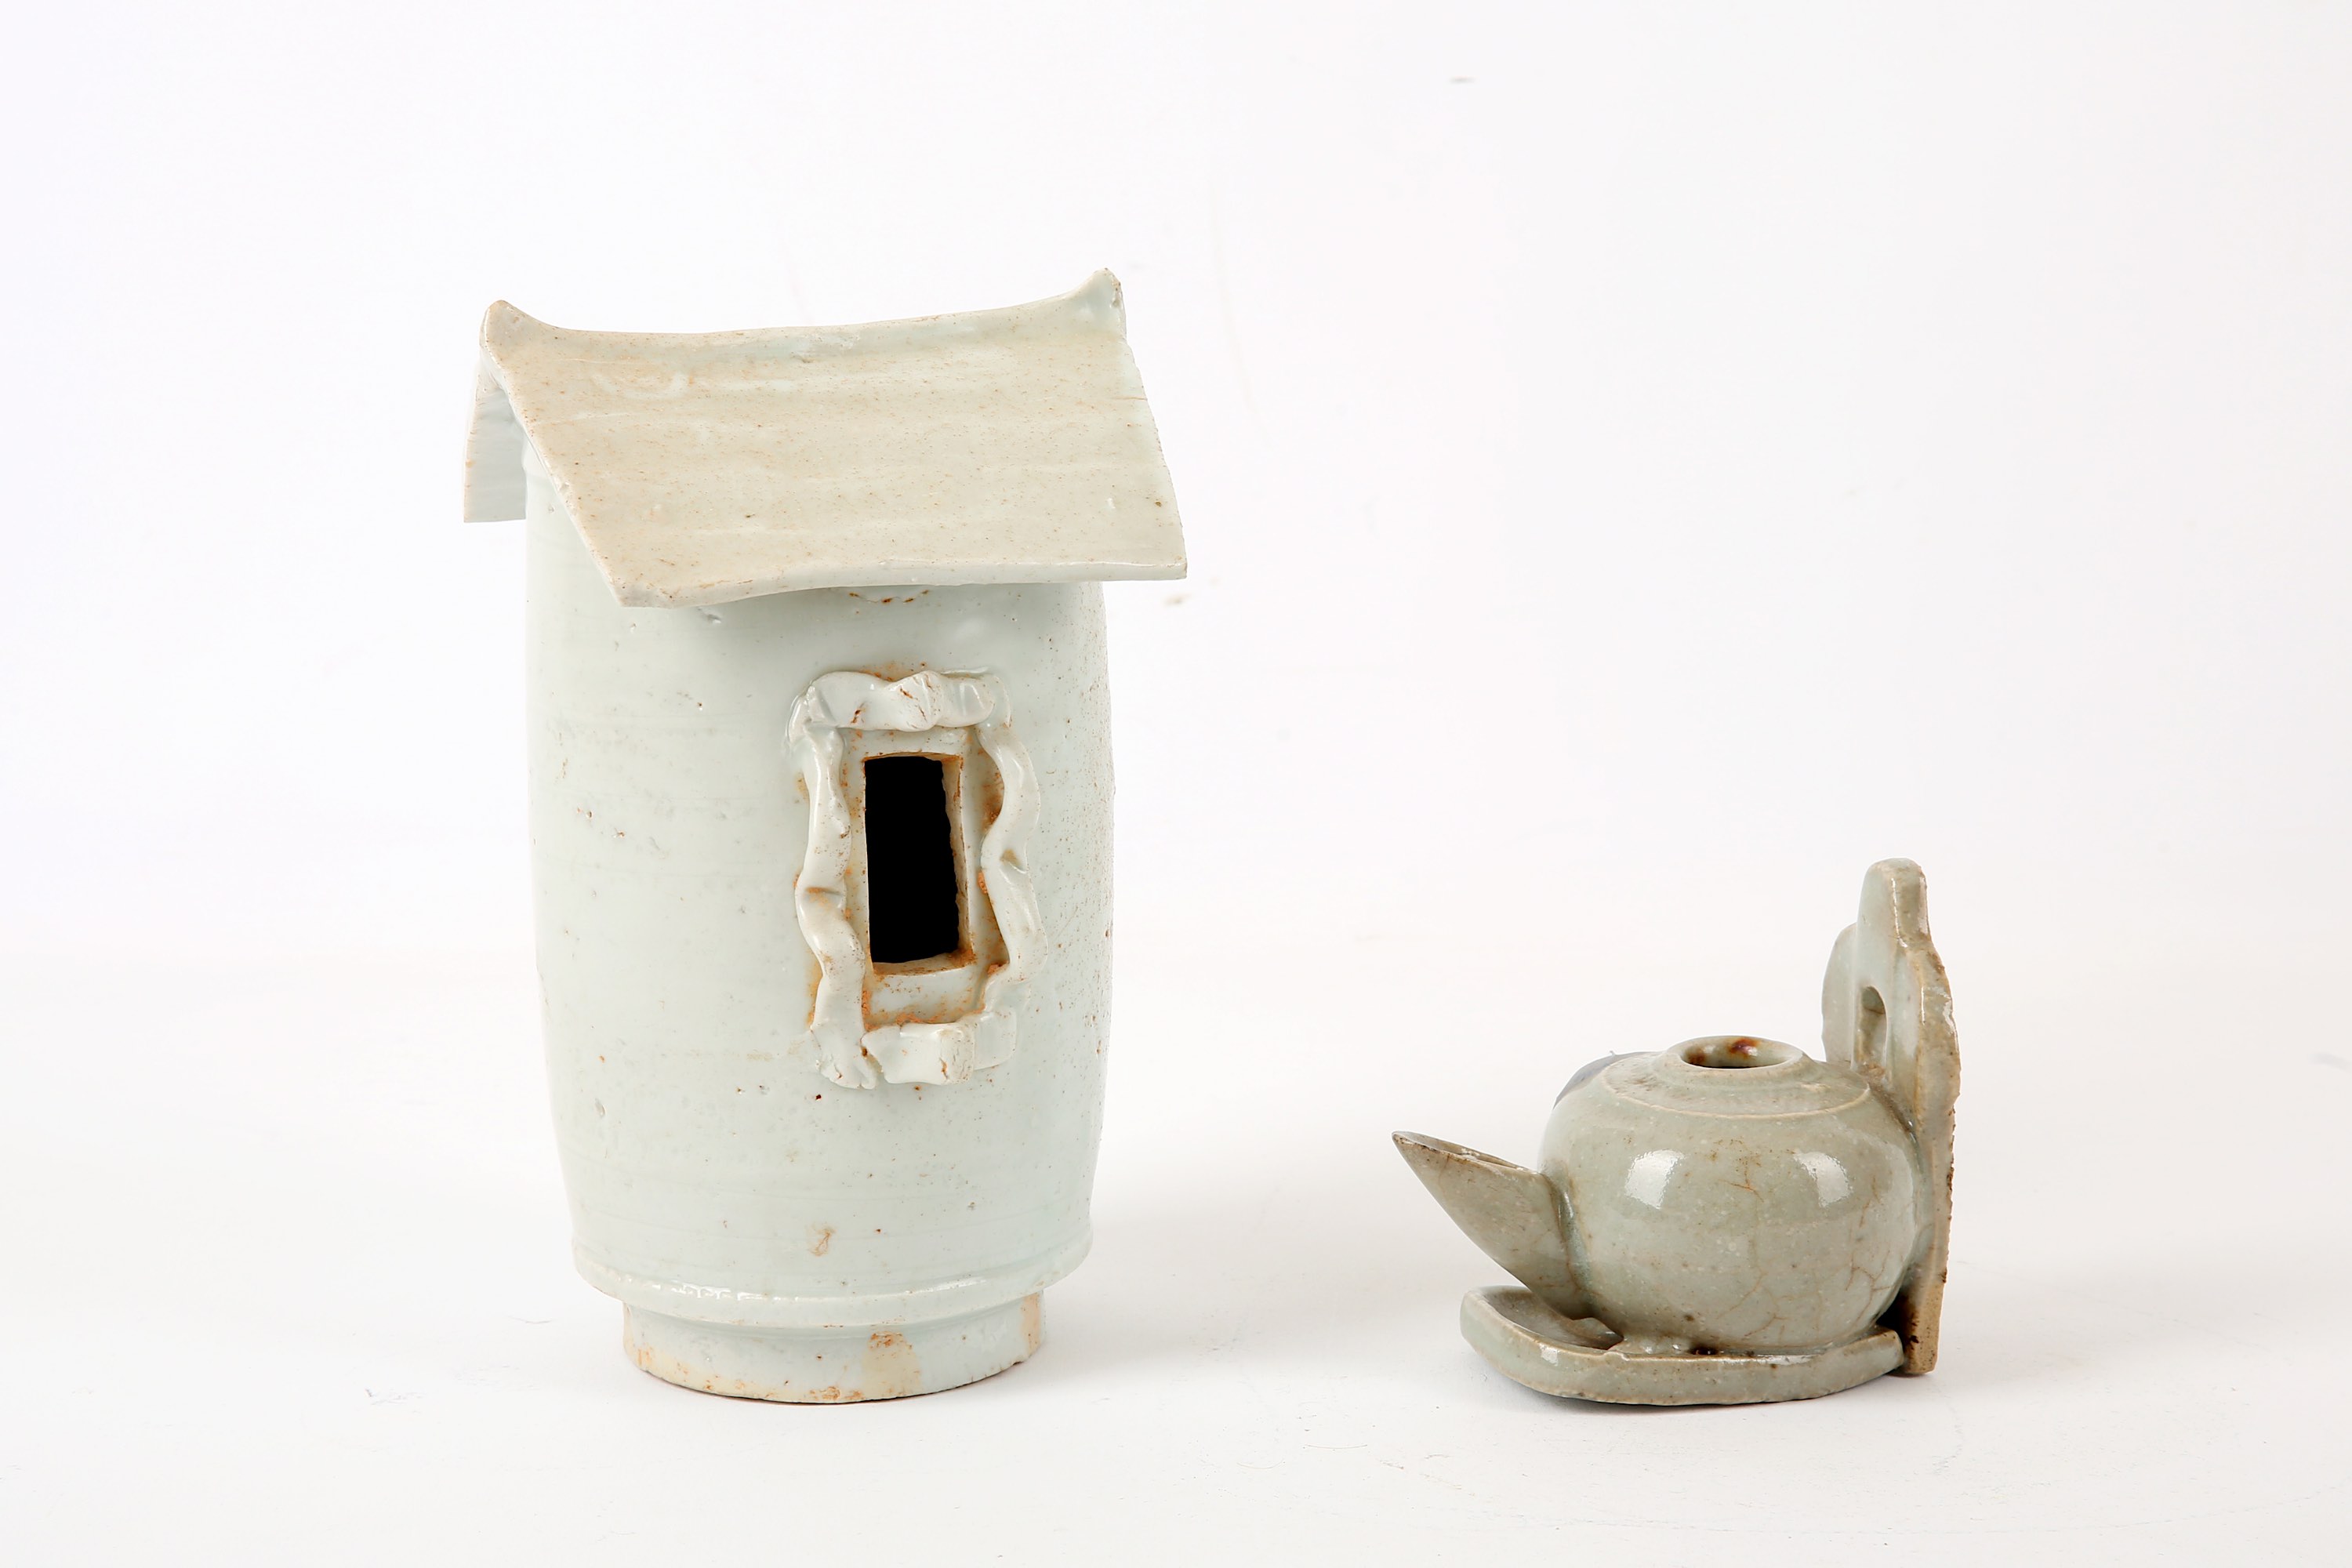 A Chinese glazed earthenware funerary model grain store, 20cm high; together with a celadon glazed